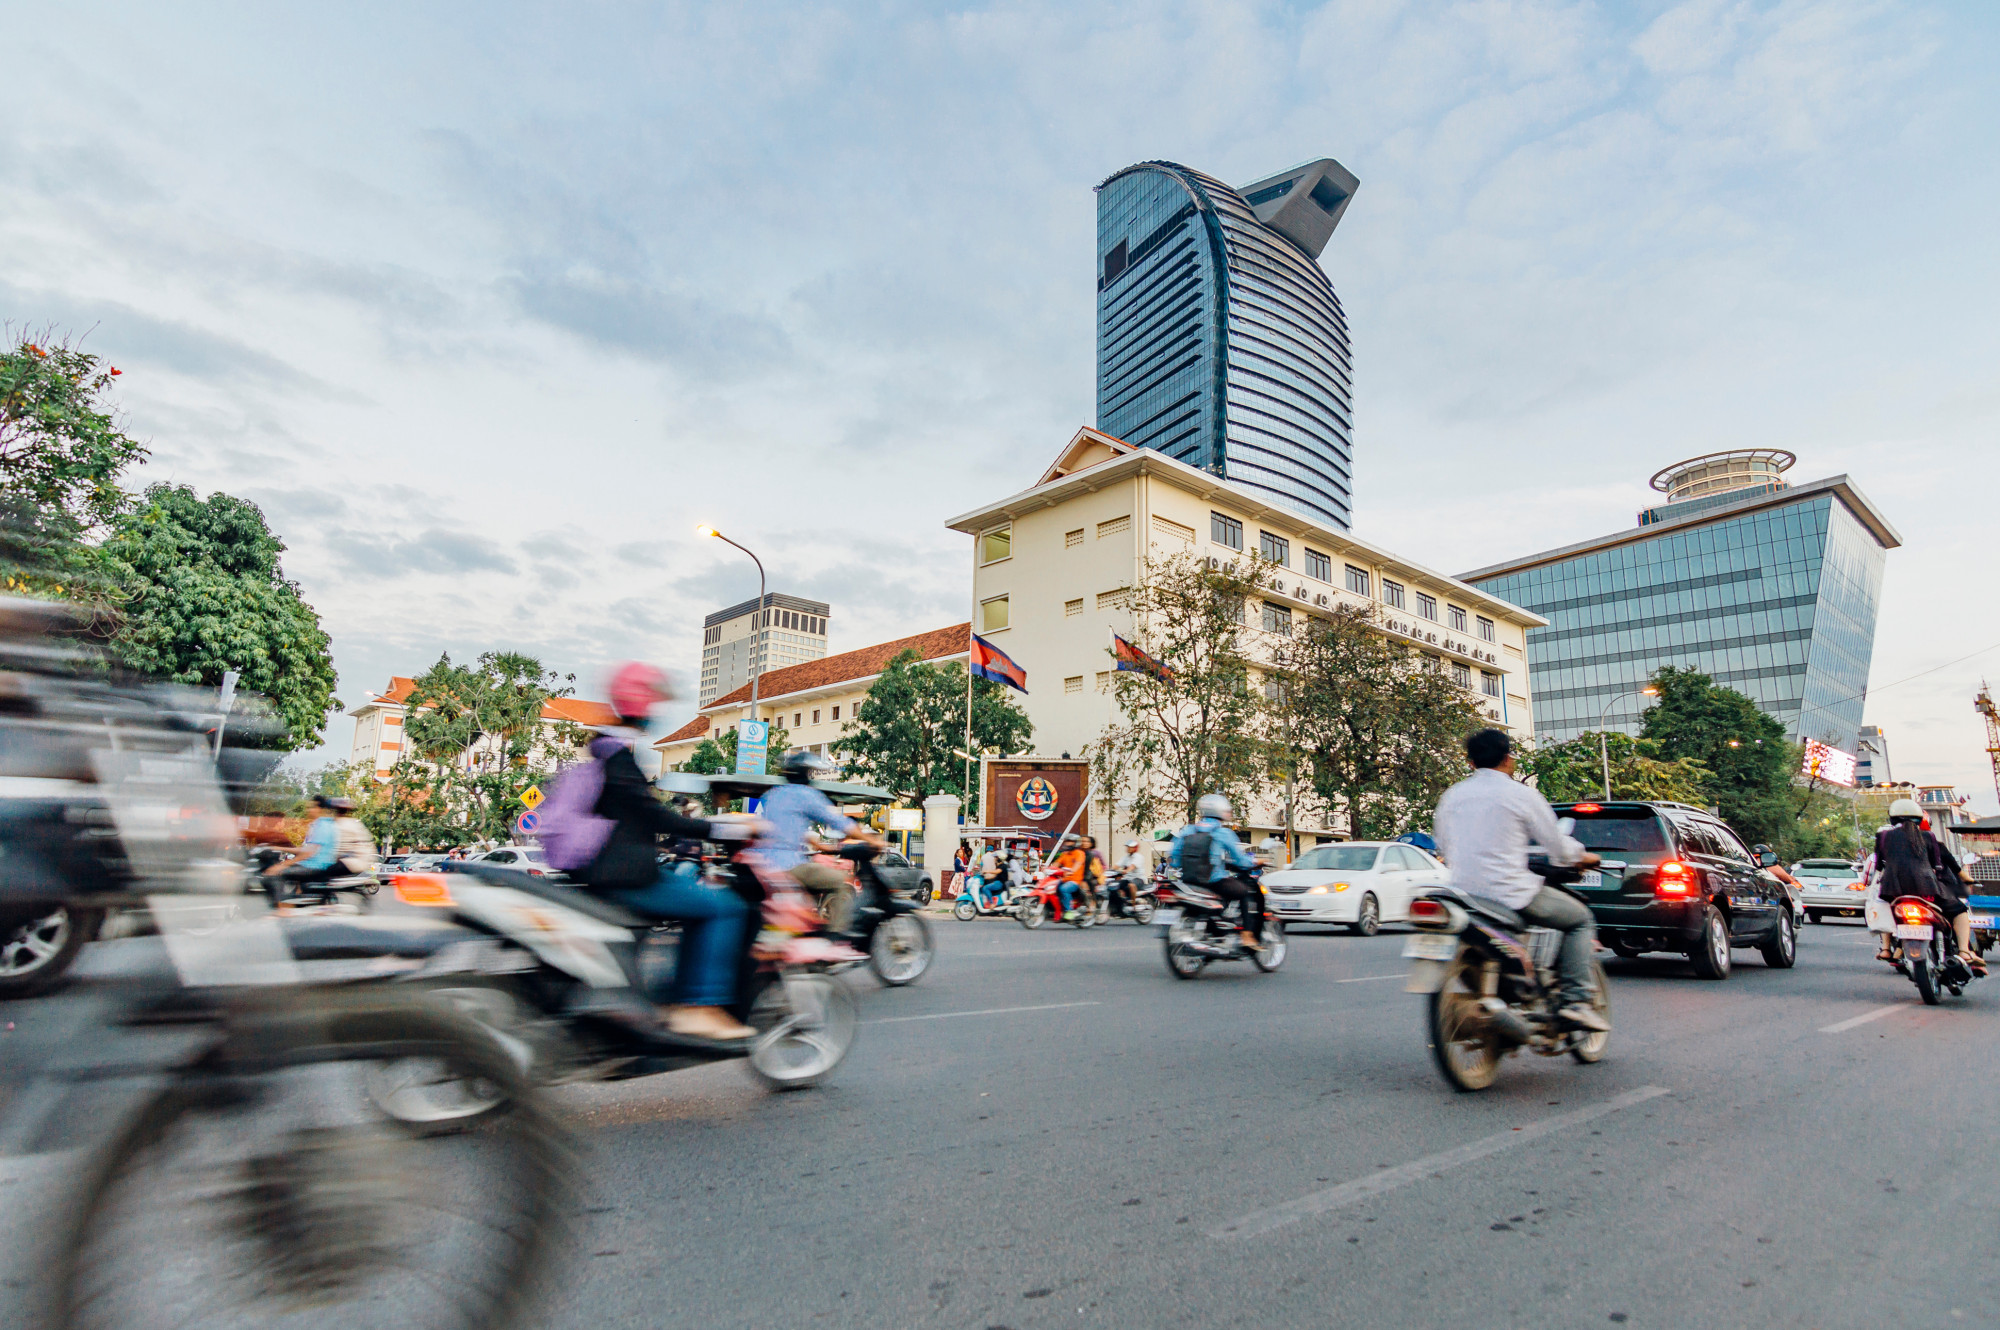 Cambodia Is Booming: What Are The Organised Crime Implications